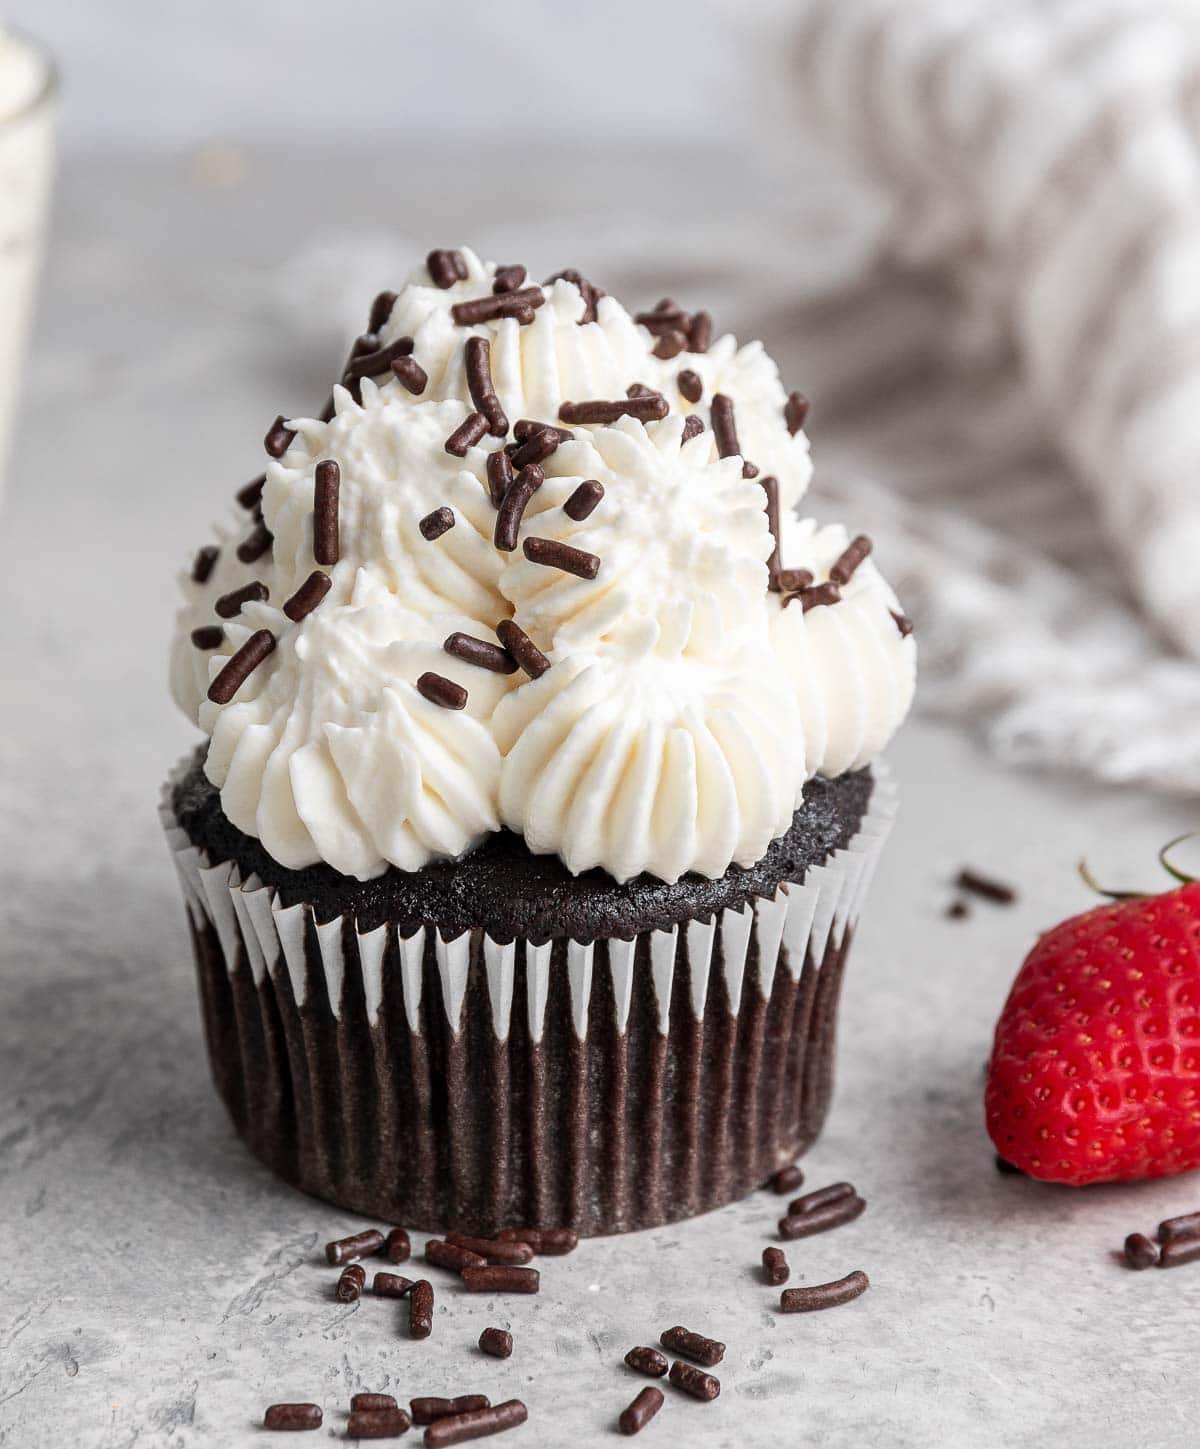 Chocolate cupcakes with white icing and chocolate sprinkles.